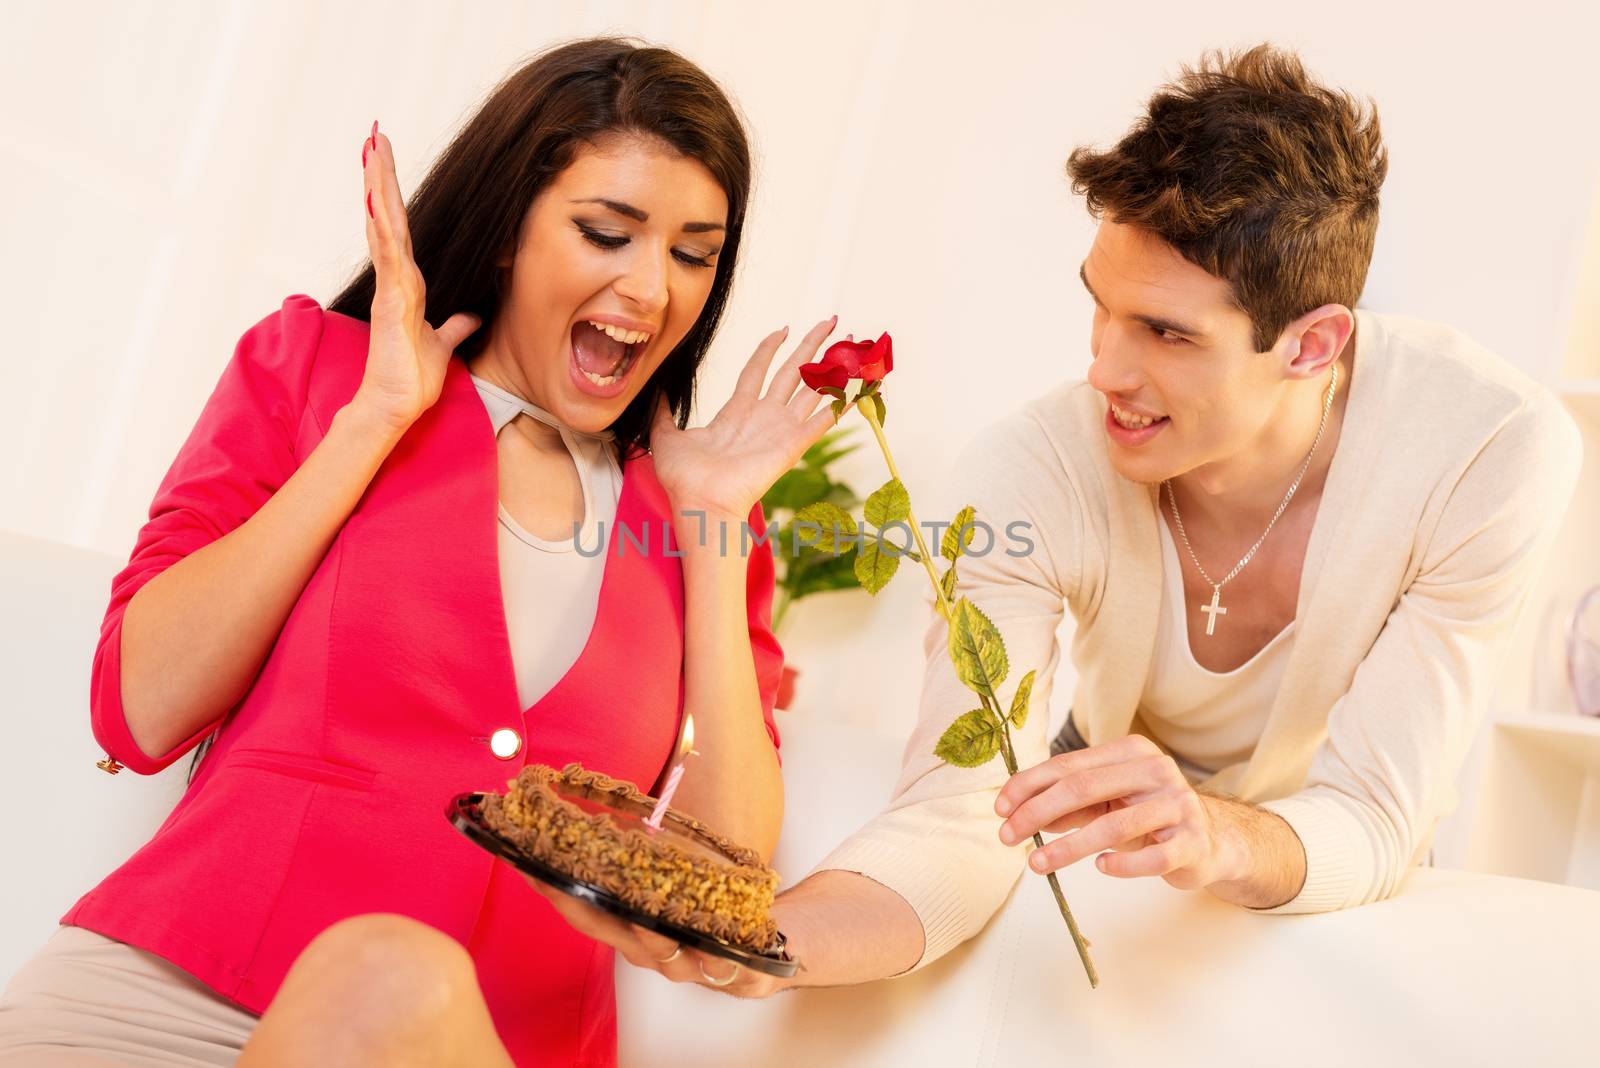 Young man with a rose in his mouth gives beautiful brunette girl birthday cake, pleasantly surprised girl with wide open mouth looking into the cake.